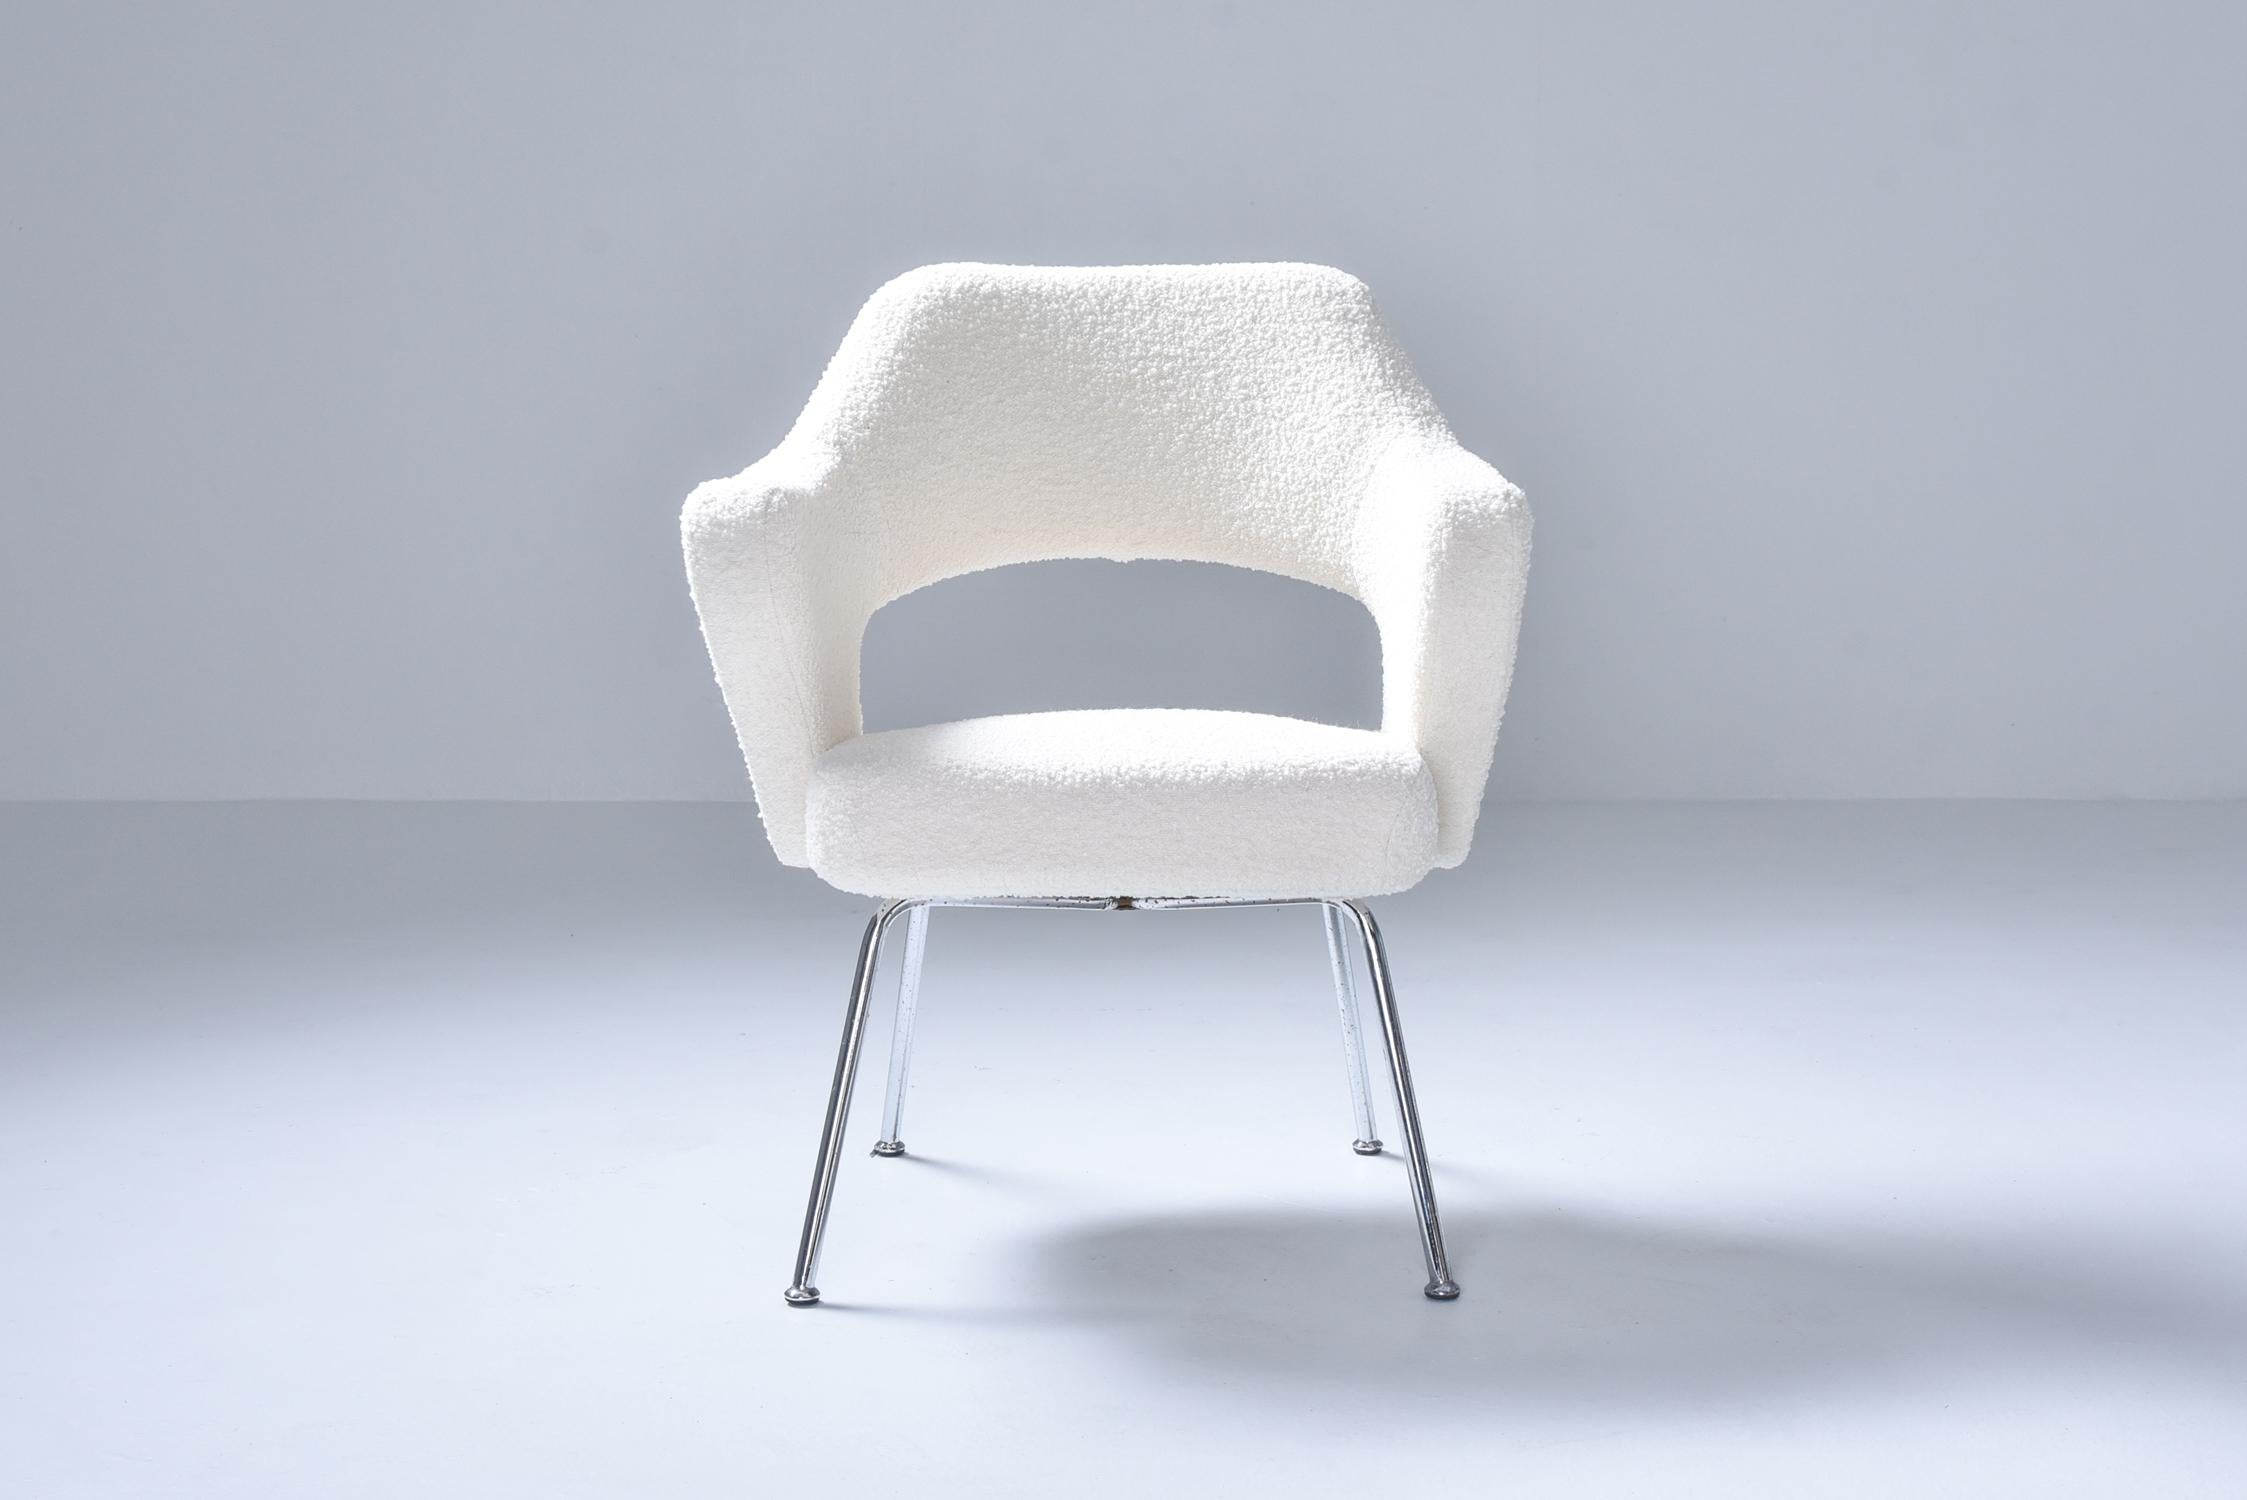 Rare model armchairs, P16, design Gastone Rinaldi, Rima Padova, 1950.

Early Postmodern Italian design armchairs by Gastone Rinaldi
His 1950s design pieces are very rare and quite sought after.
Newly upholstered in white bouclé wool.
We have 12